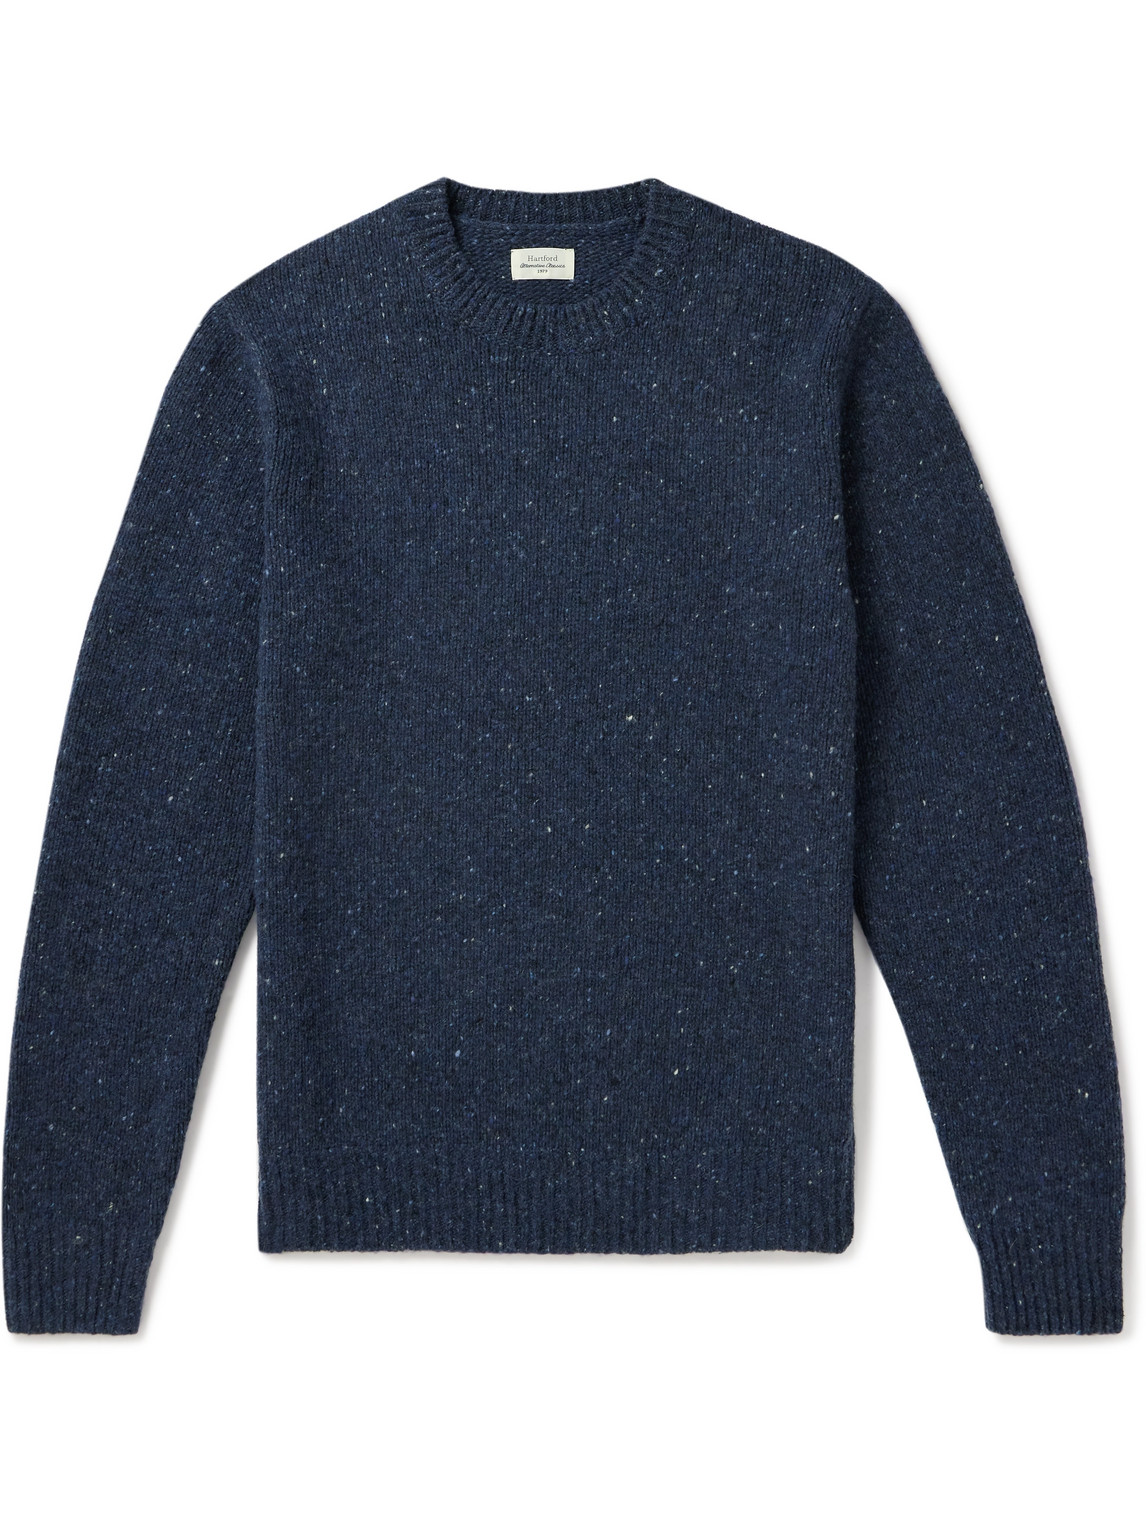 Donegal Wool-Blend Sweater